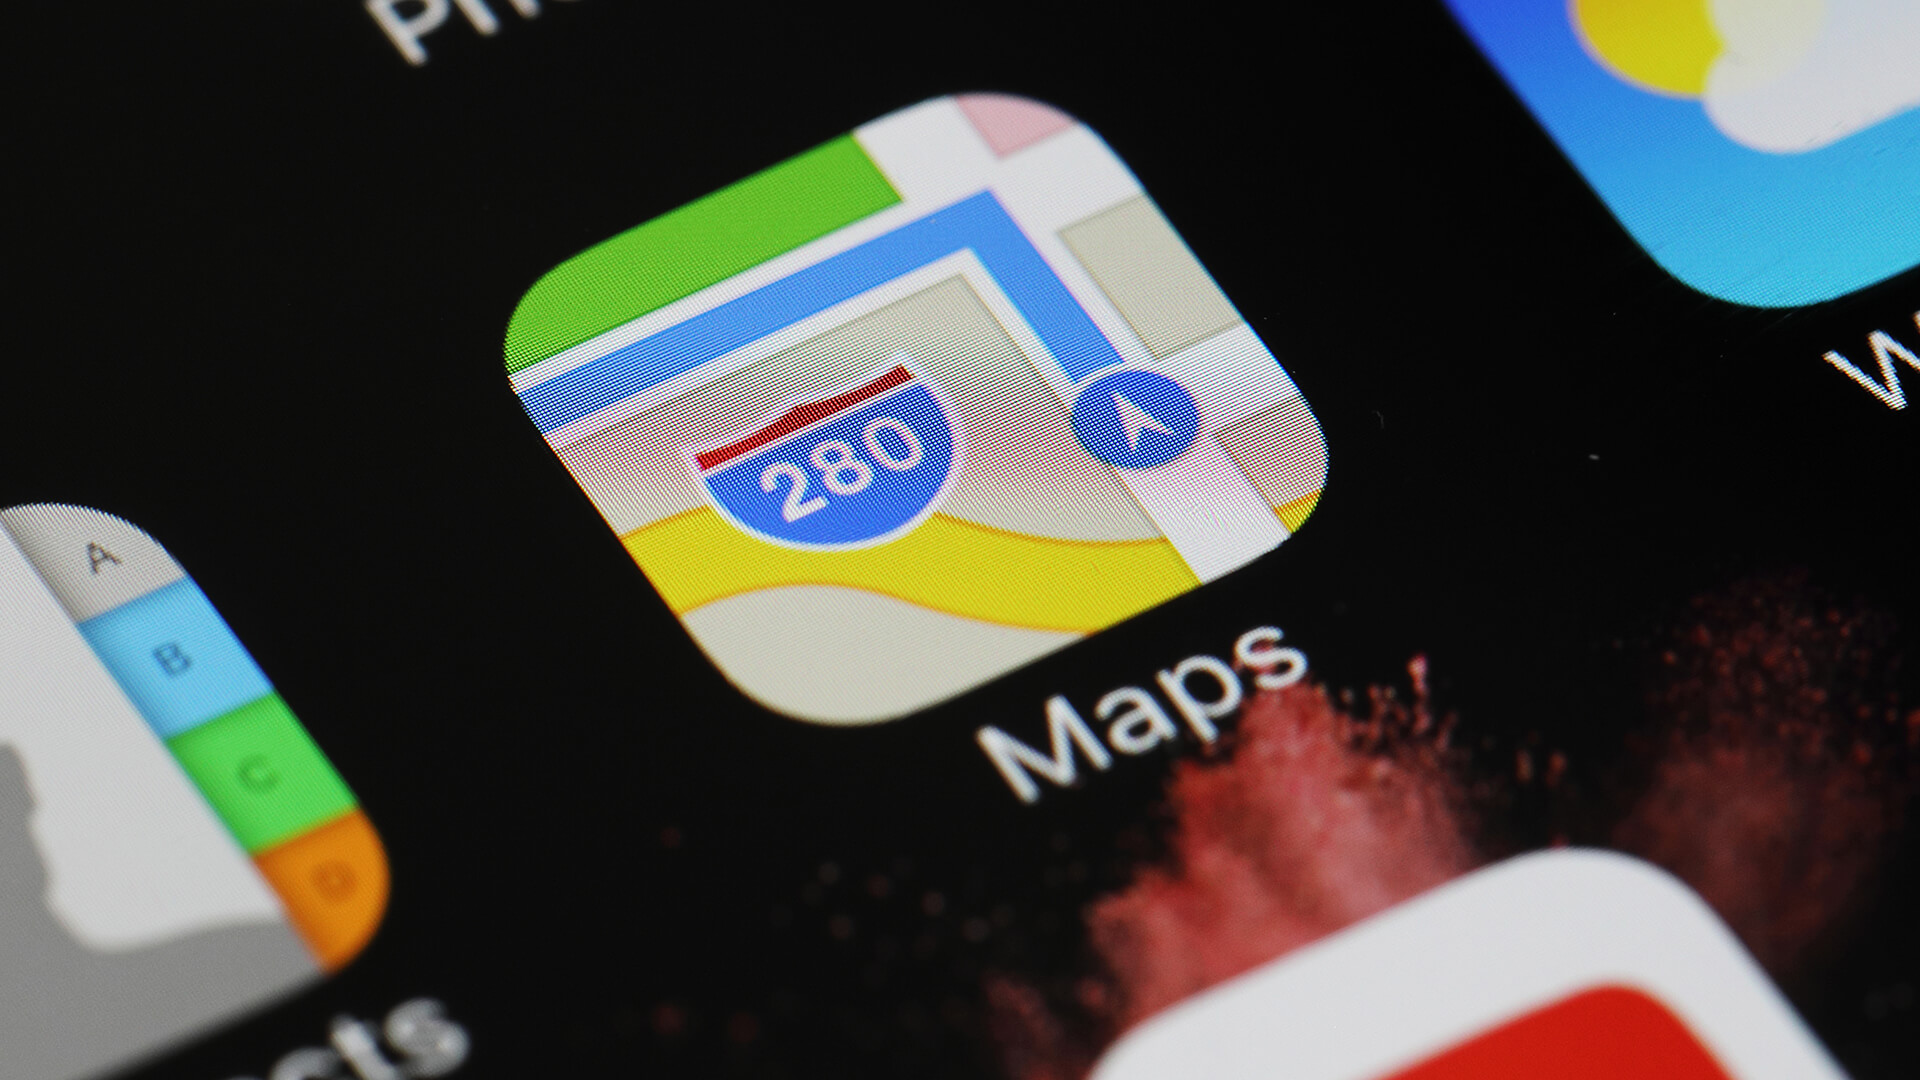 Apple Maps relaunches Apple Business Connect